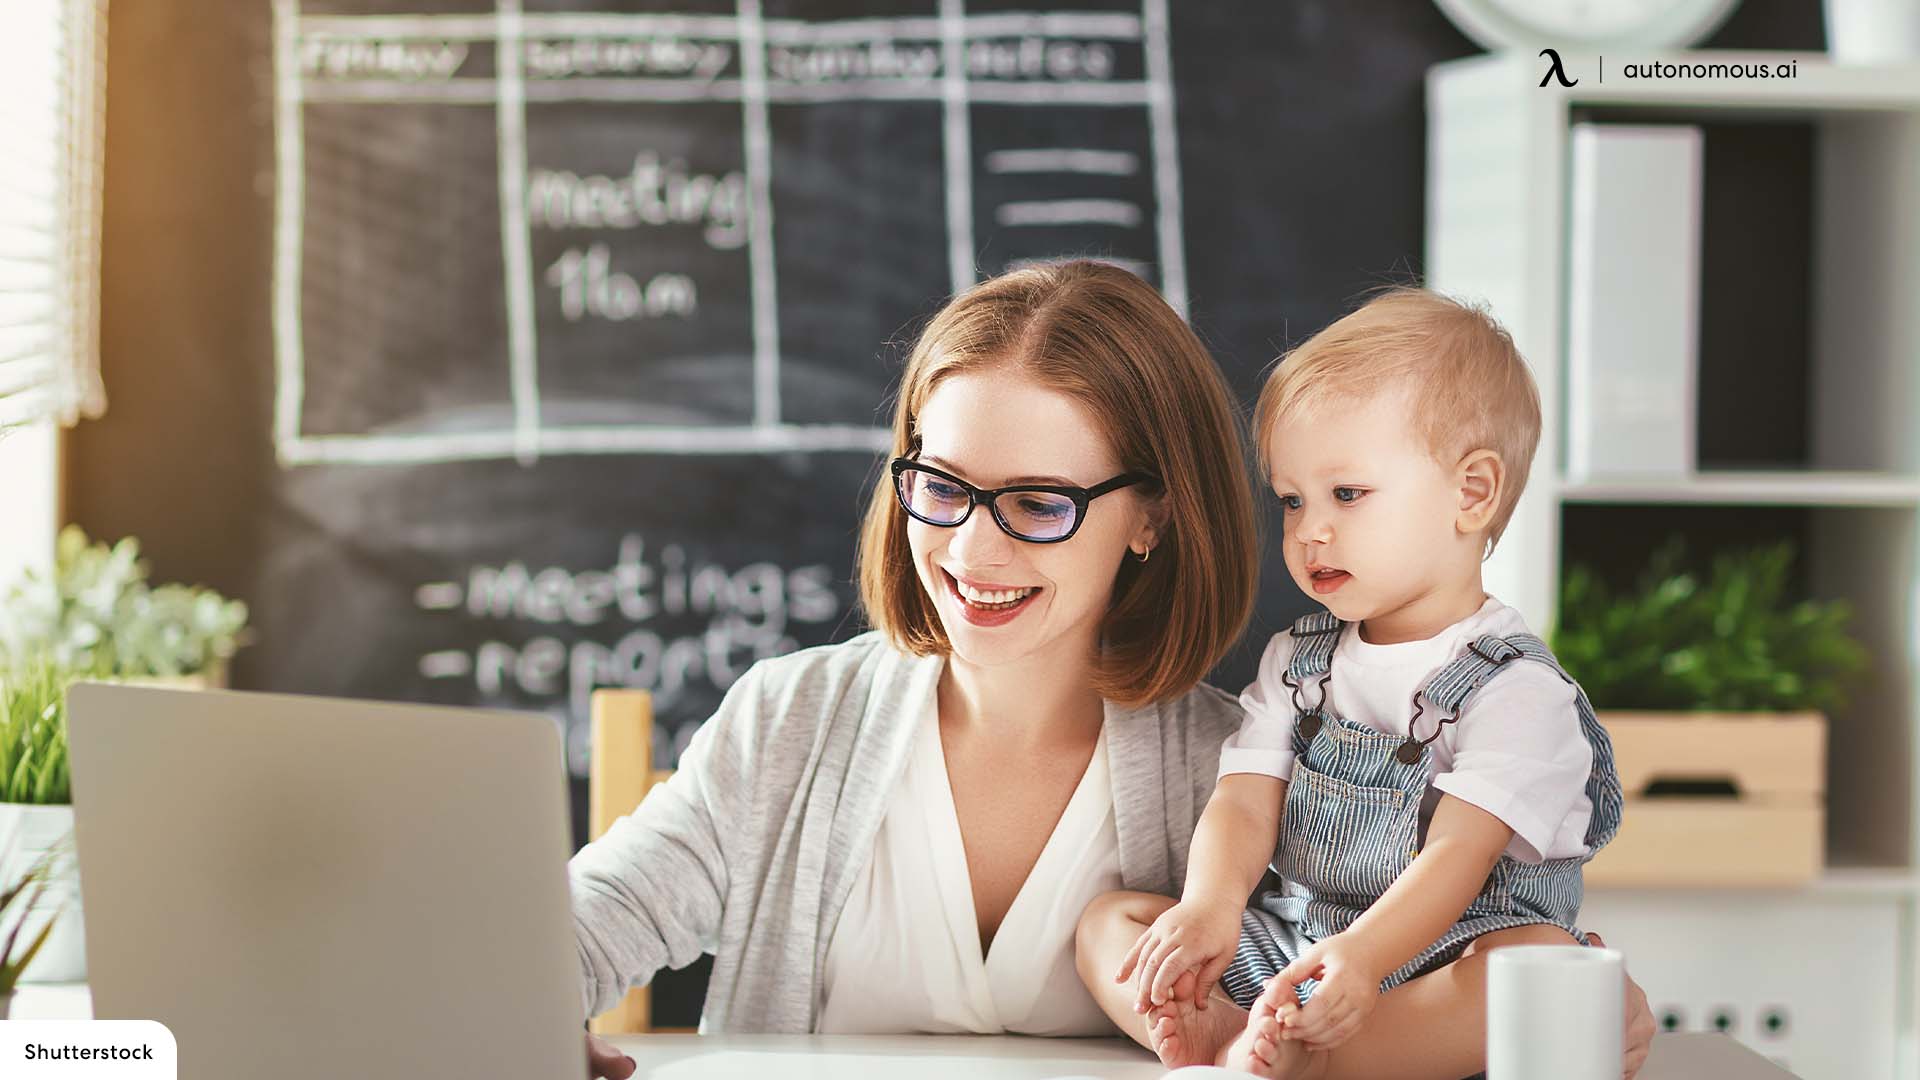 Tips for Moms Working From Home